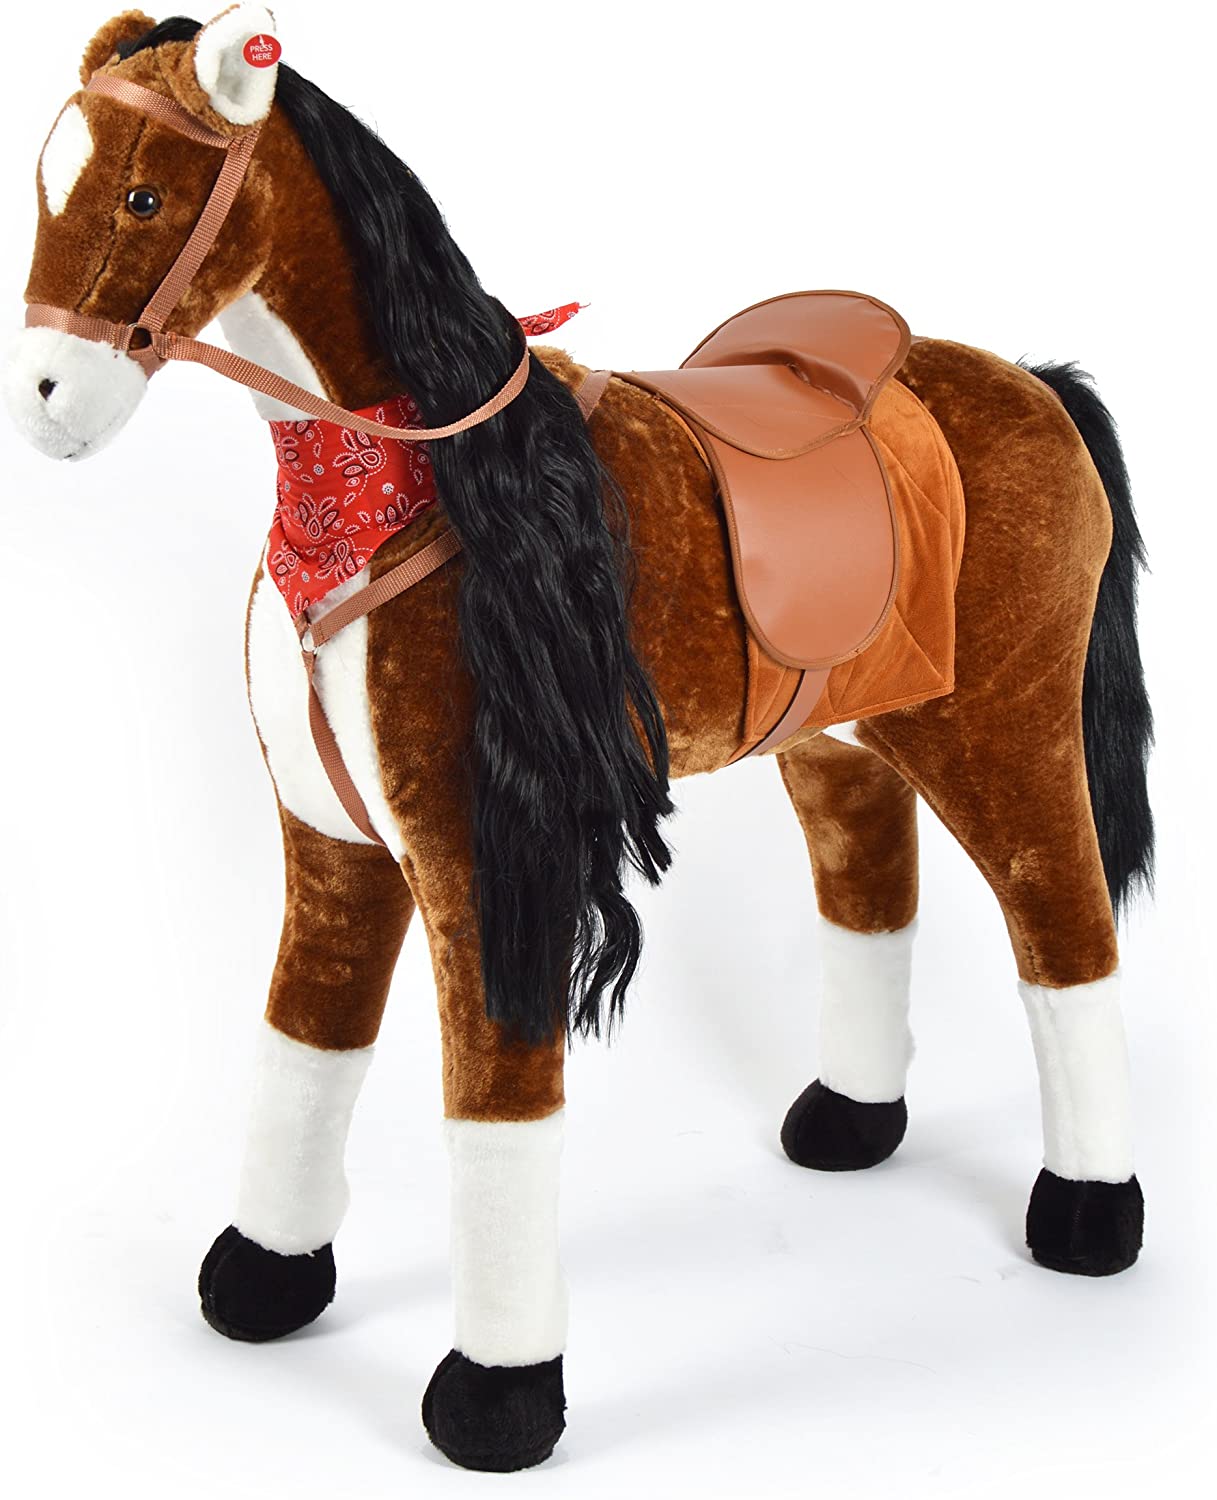 Plush Horse, XXL 105 cm – The Giant Horse, For Riding, A Great Standing Horse XXL up to 100 kg, Play Horse with Brush for Sitting On  – A Child\'s Dream.